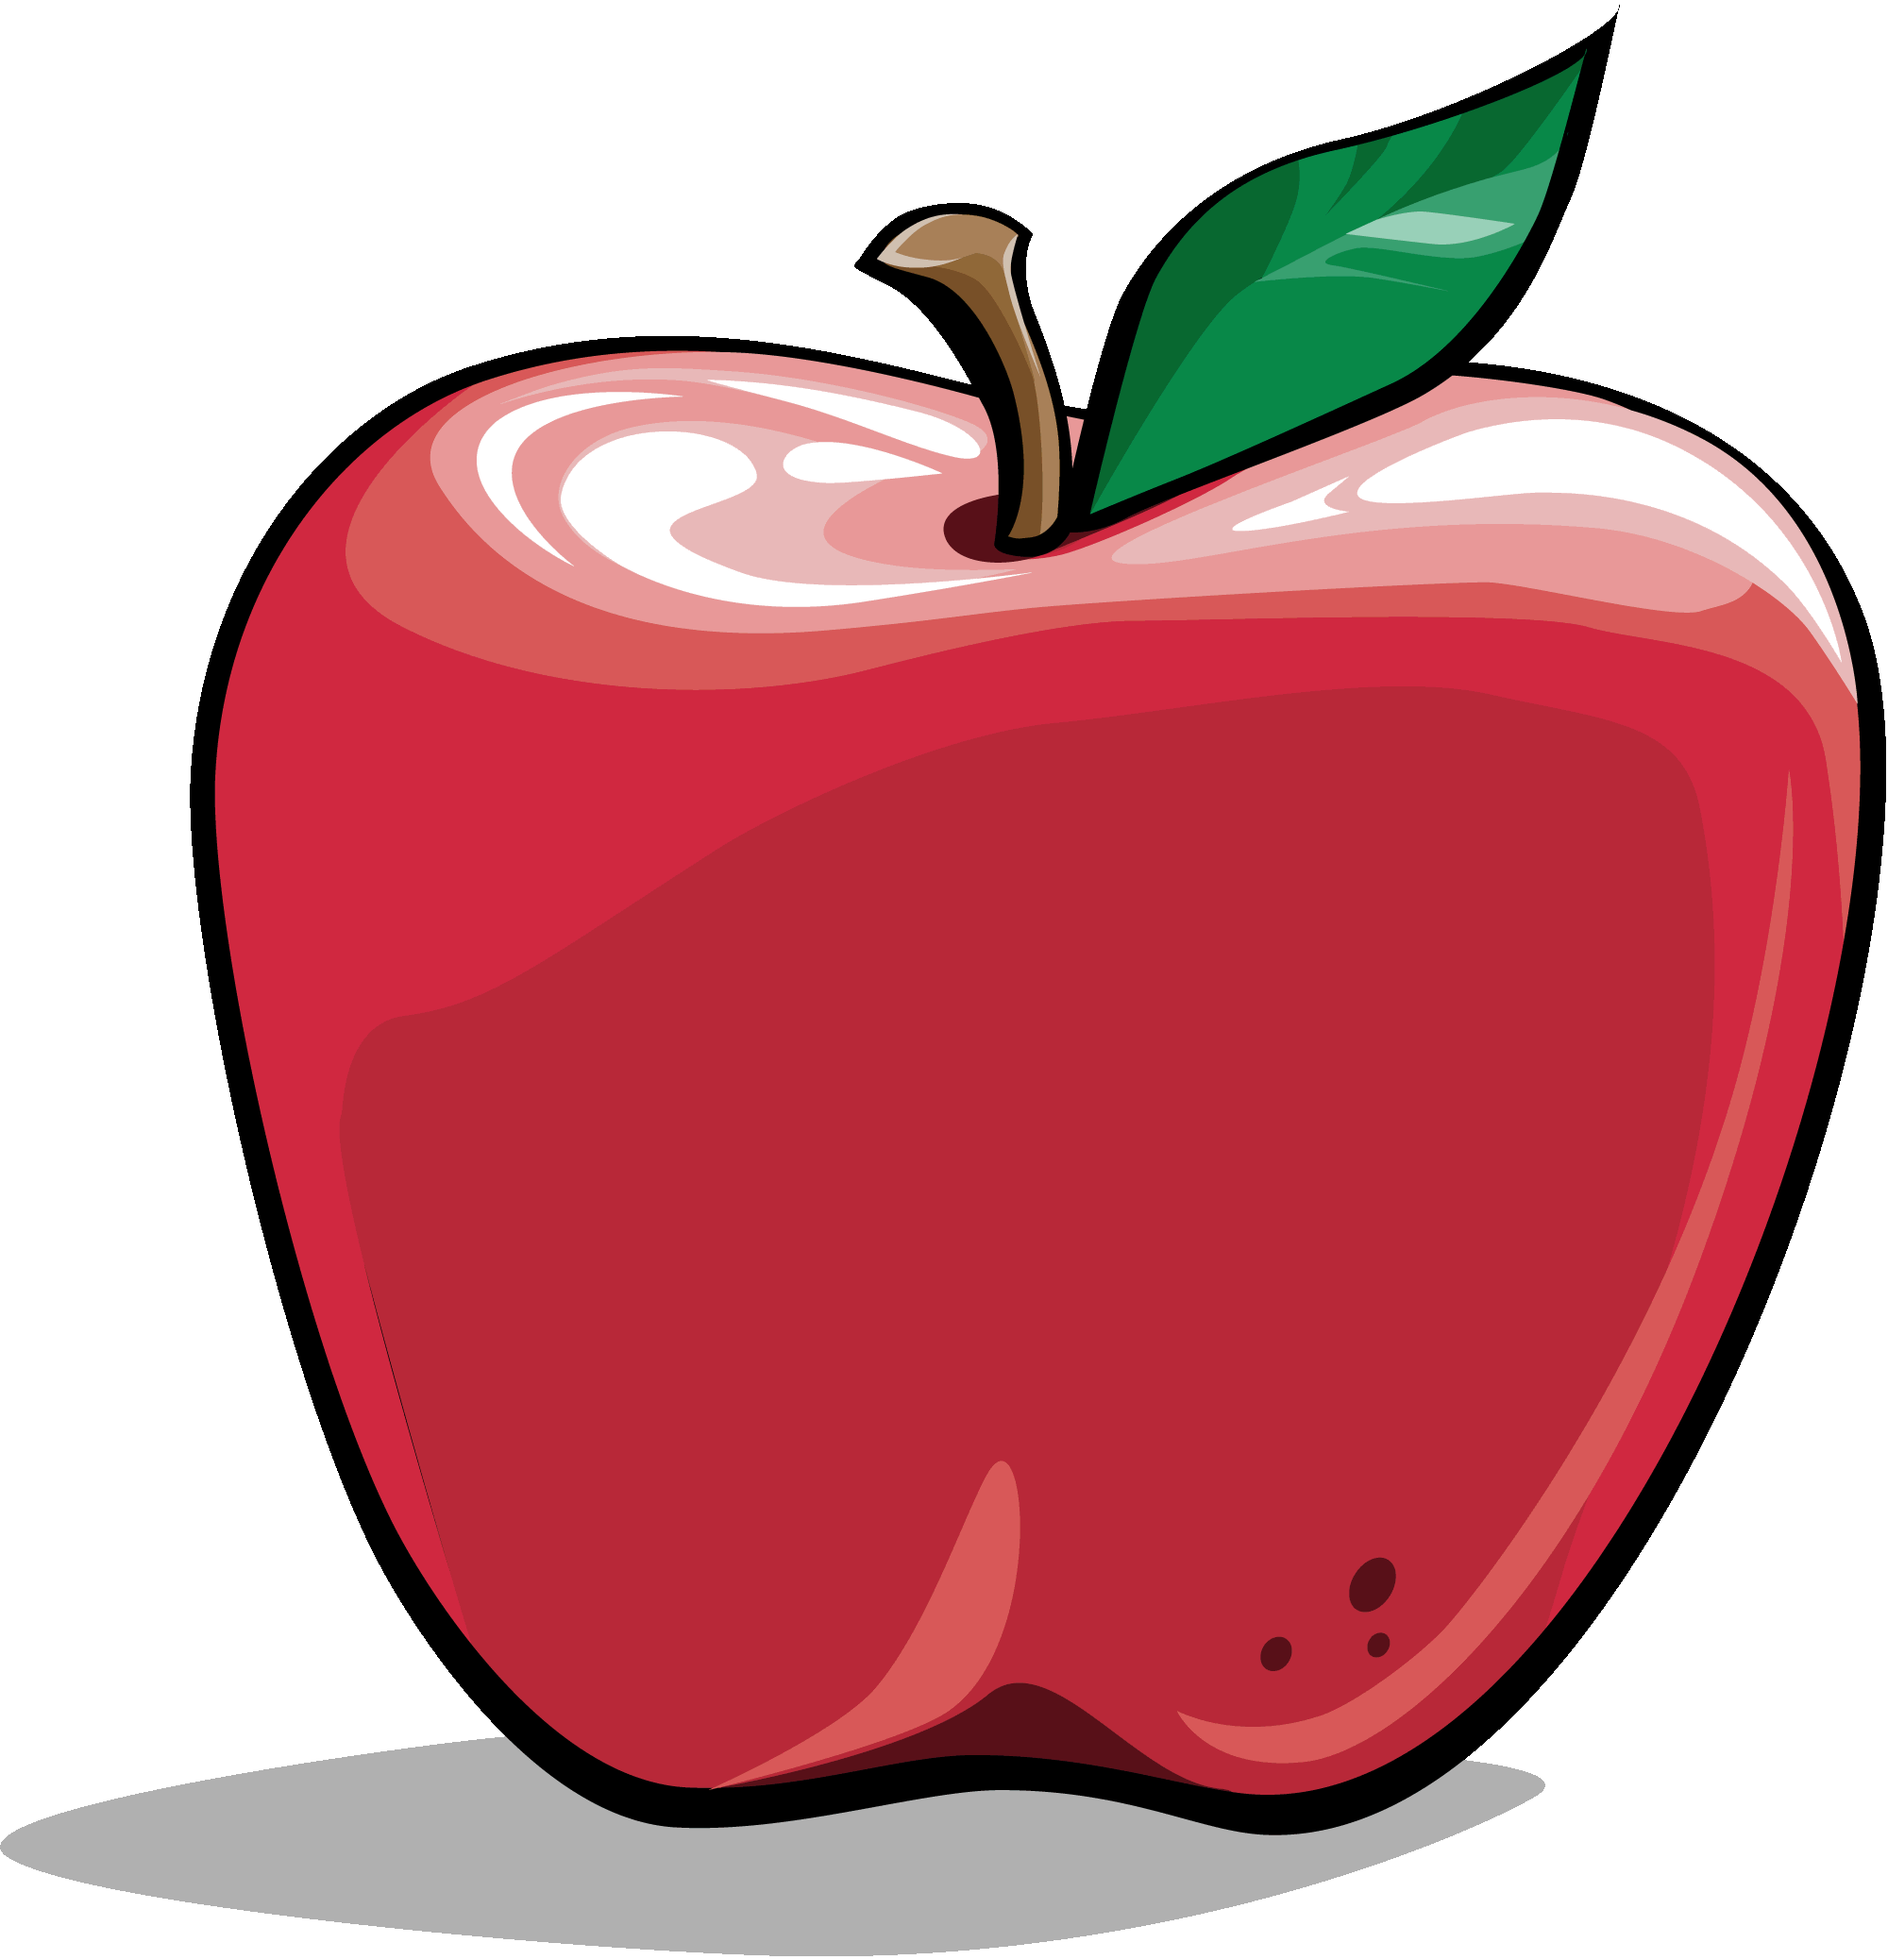 Clipart Apple Image Image Png Clipart